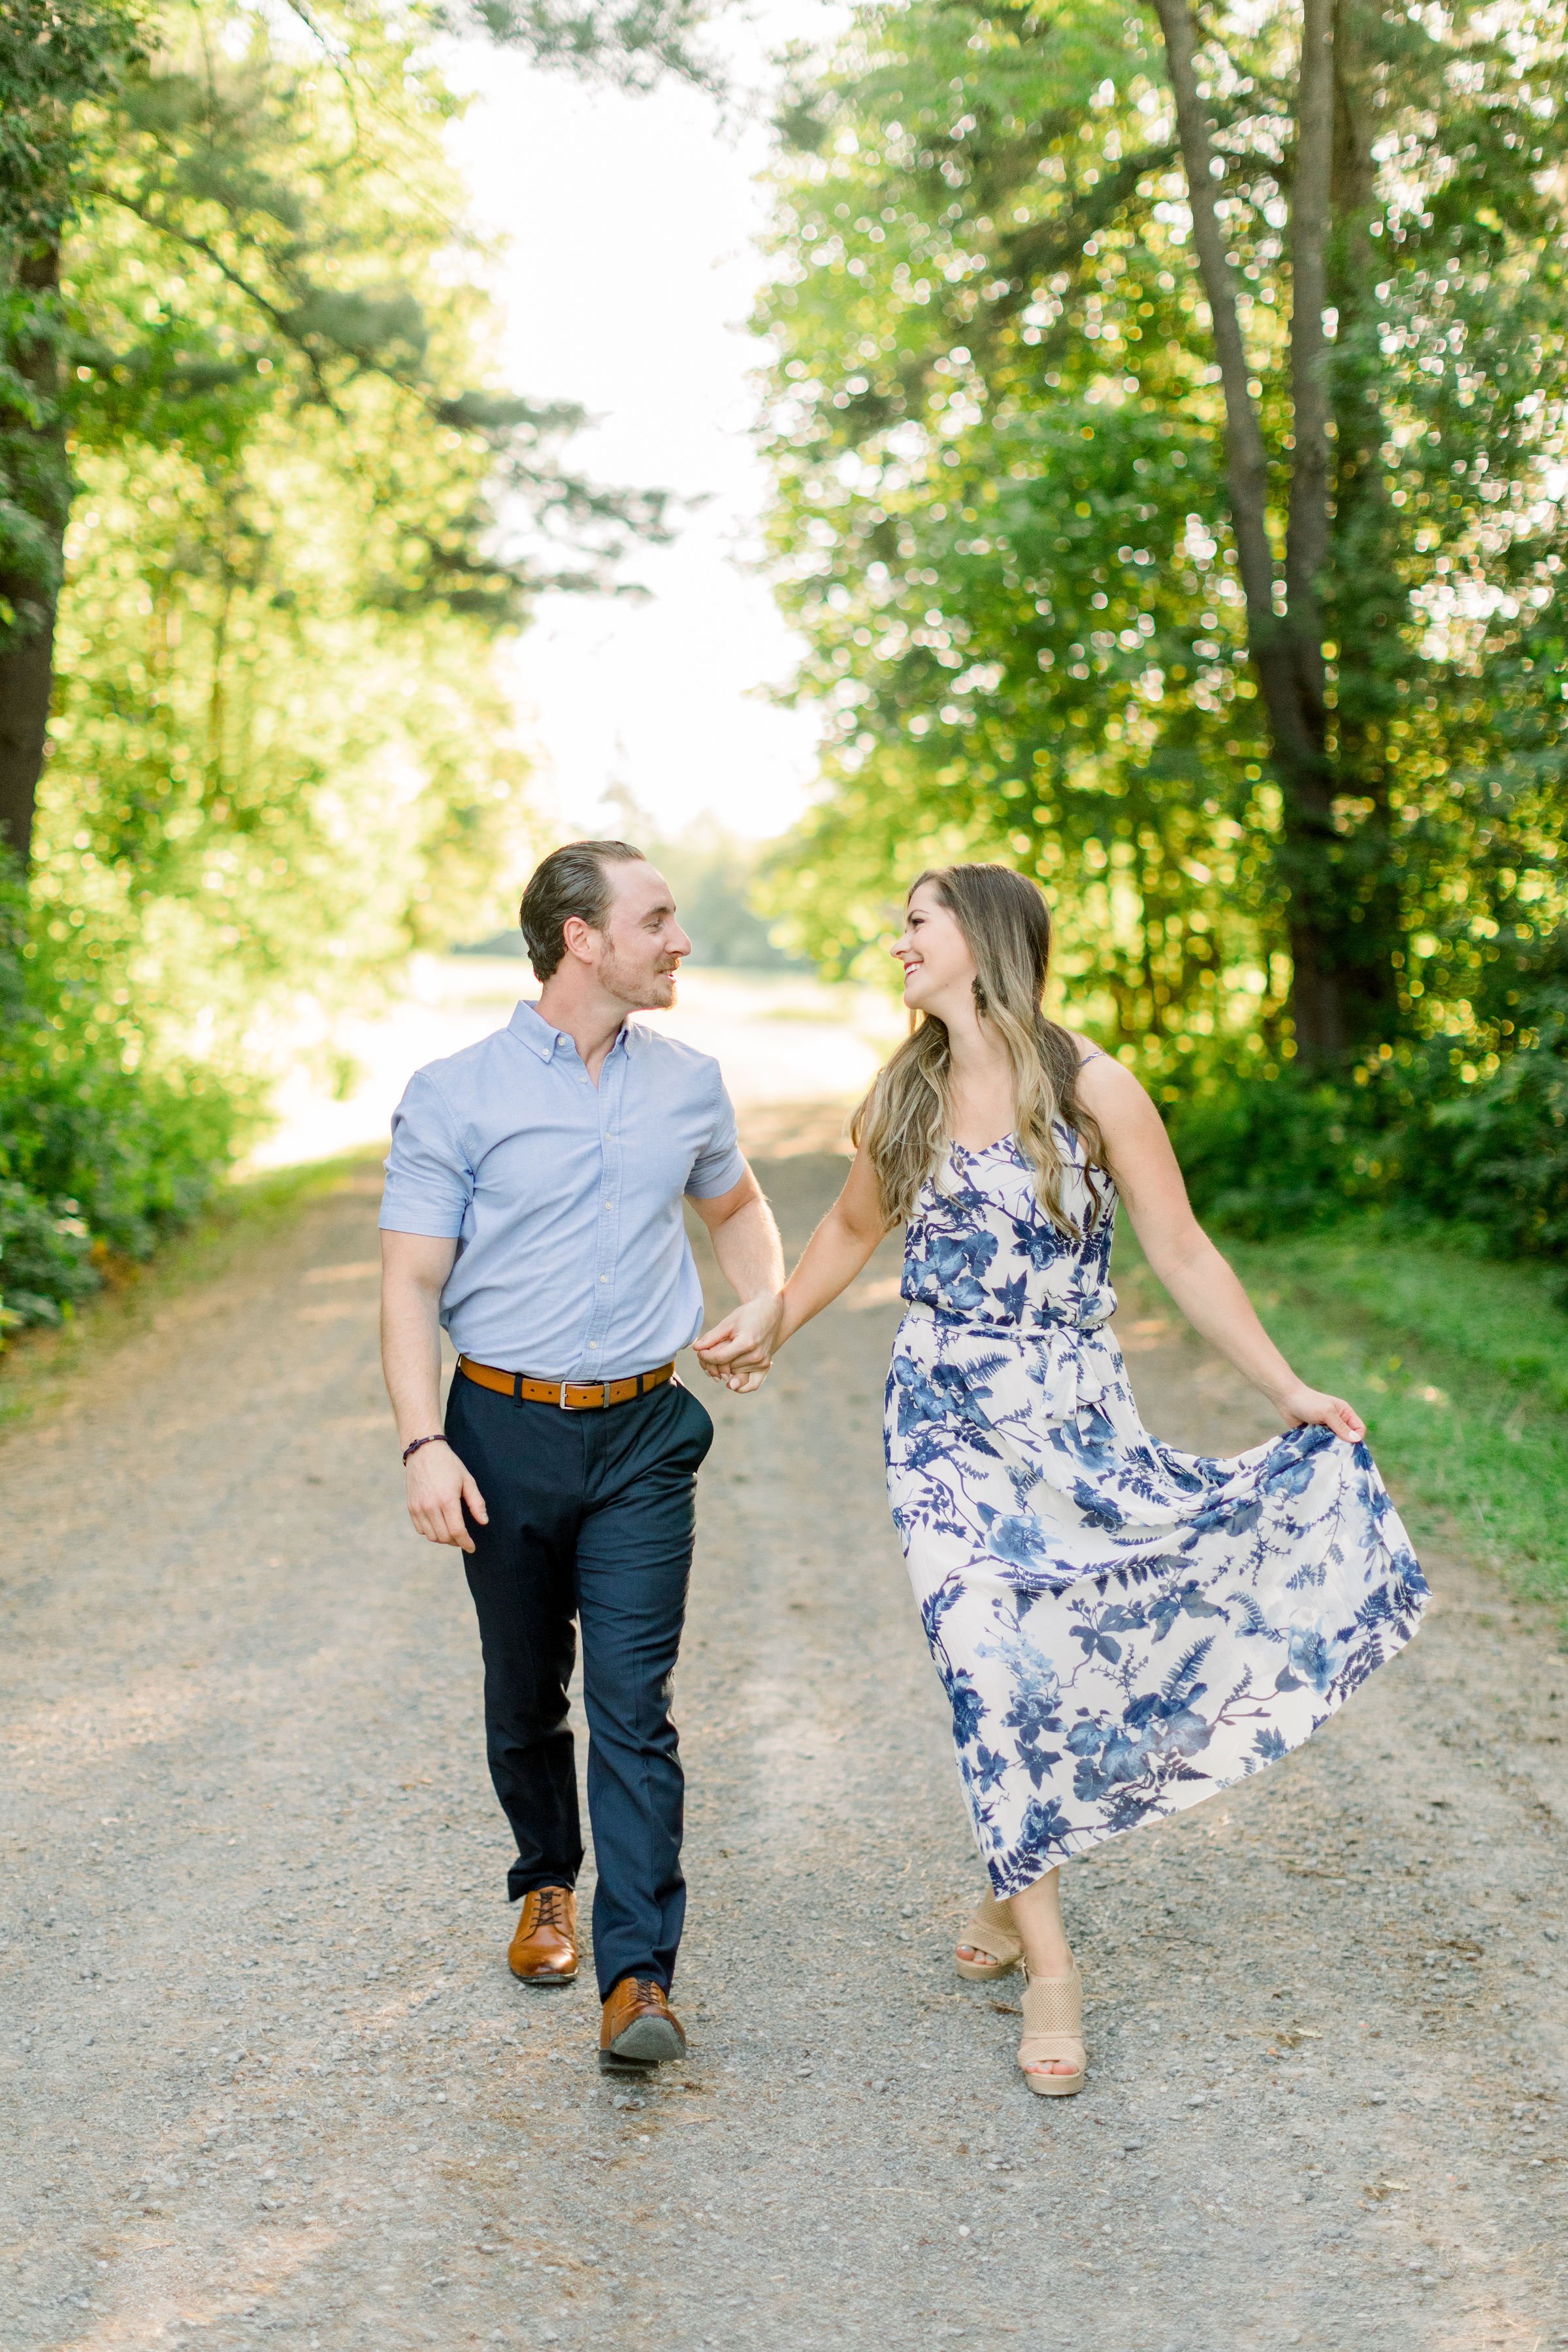  Walking on a dirt road a newly engaged couple holds hands captured by Chelsea Mason Photography. dirt path blue dress #chelseamasonphotography #chelseamasonengagements #millofkintail #Ottawaengagments #Almonteengagementphotographer #outdoorengagment